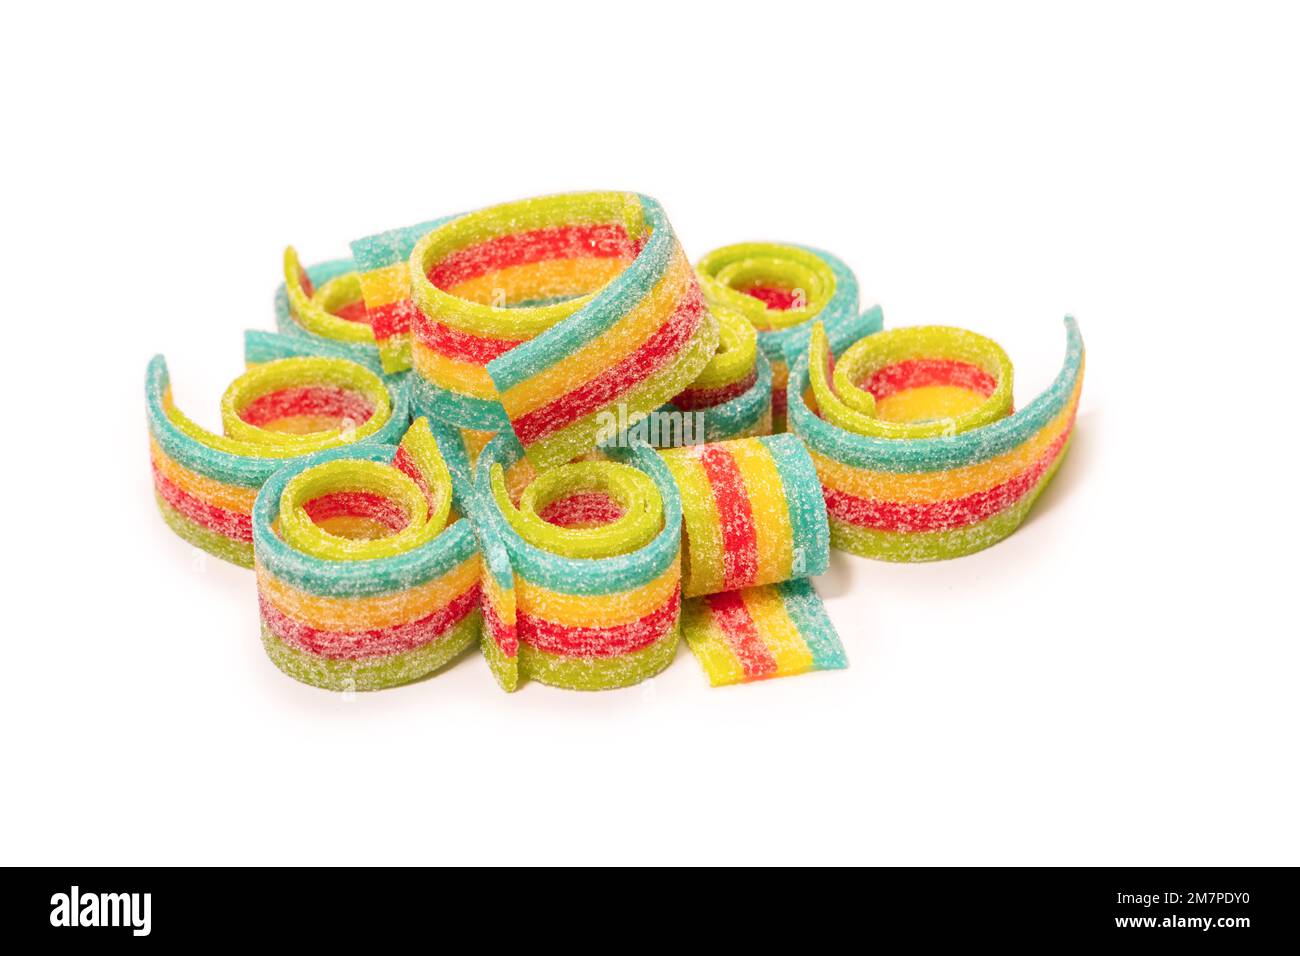 Colorful gummy candies. Top view. Isolated on a white background. Stock Photo